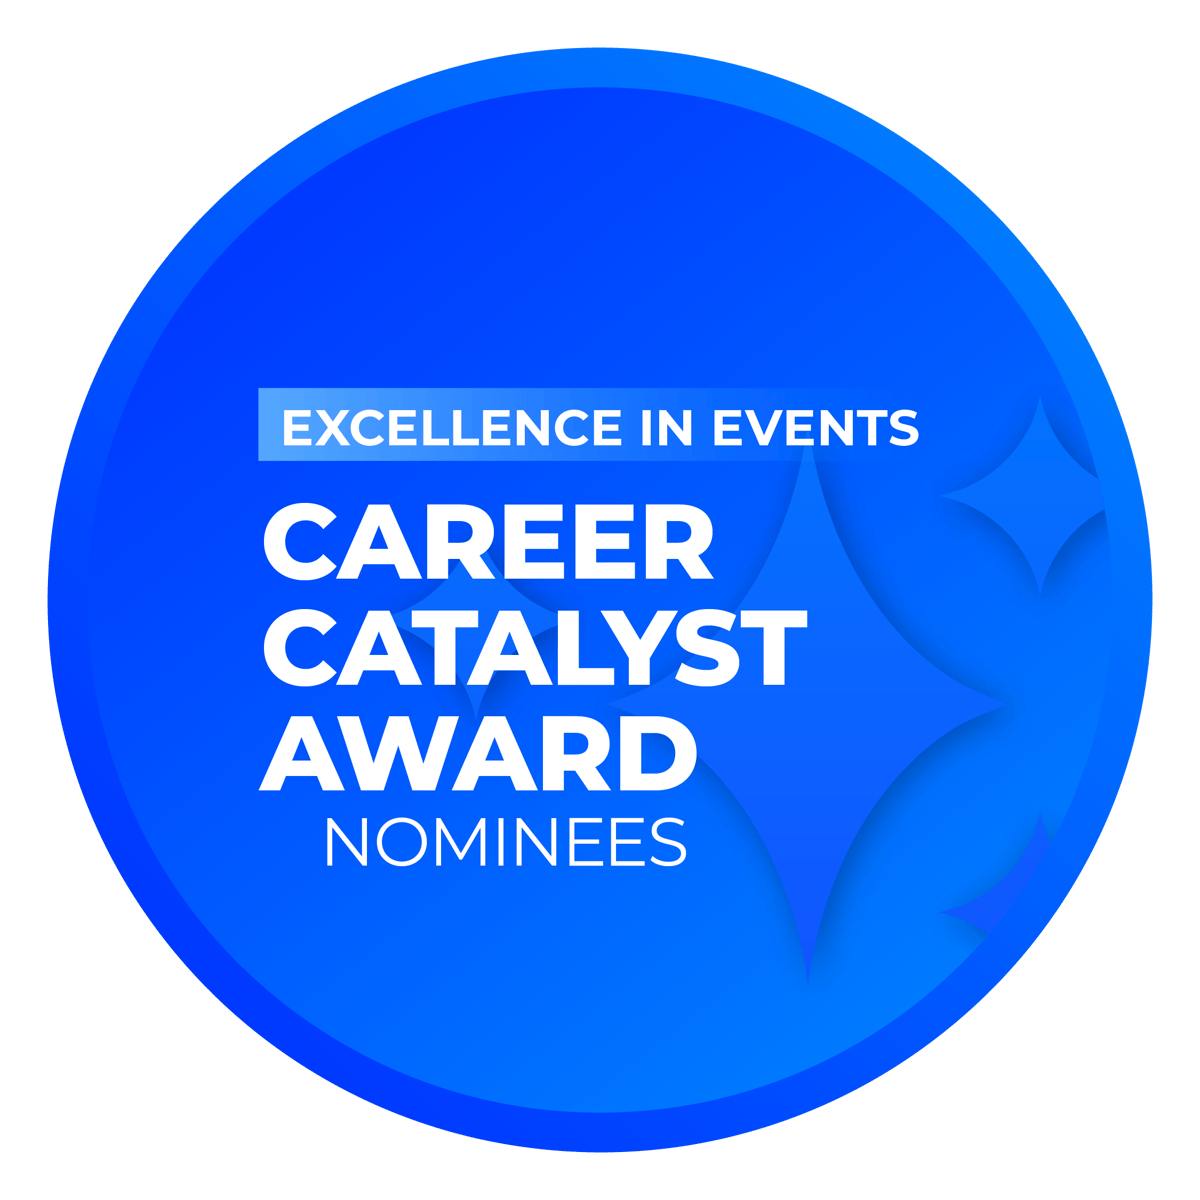 Career Catalyst Award: Excellence in Events Nominees